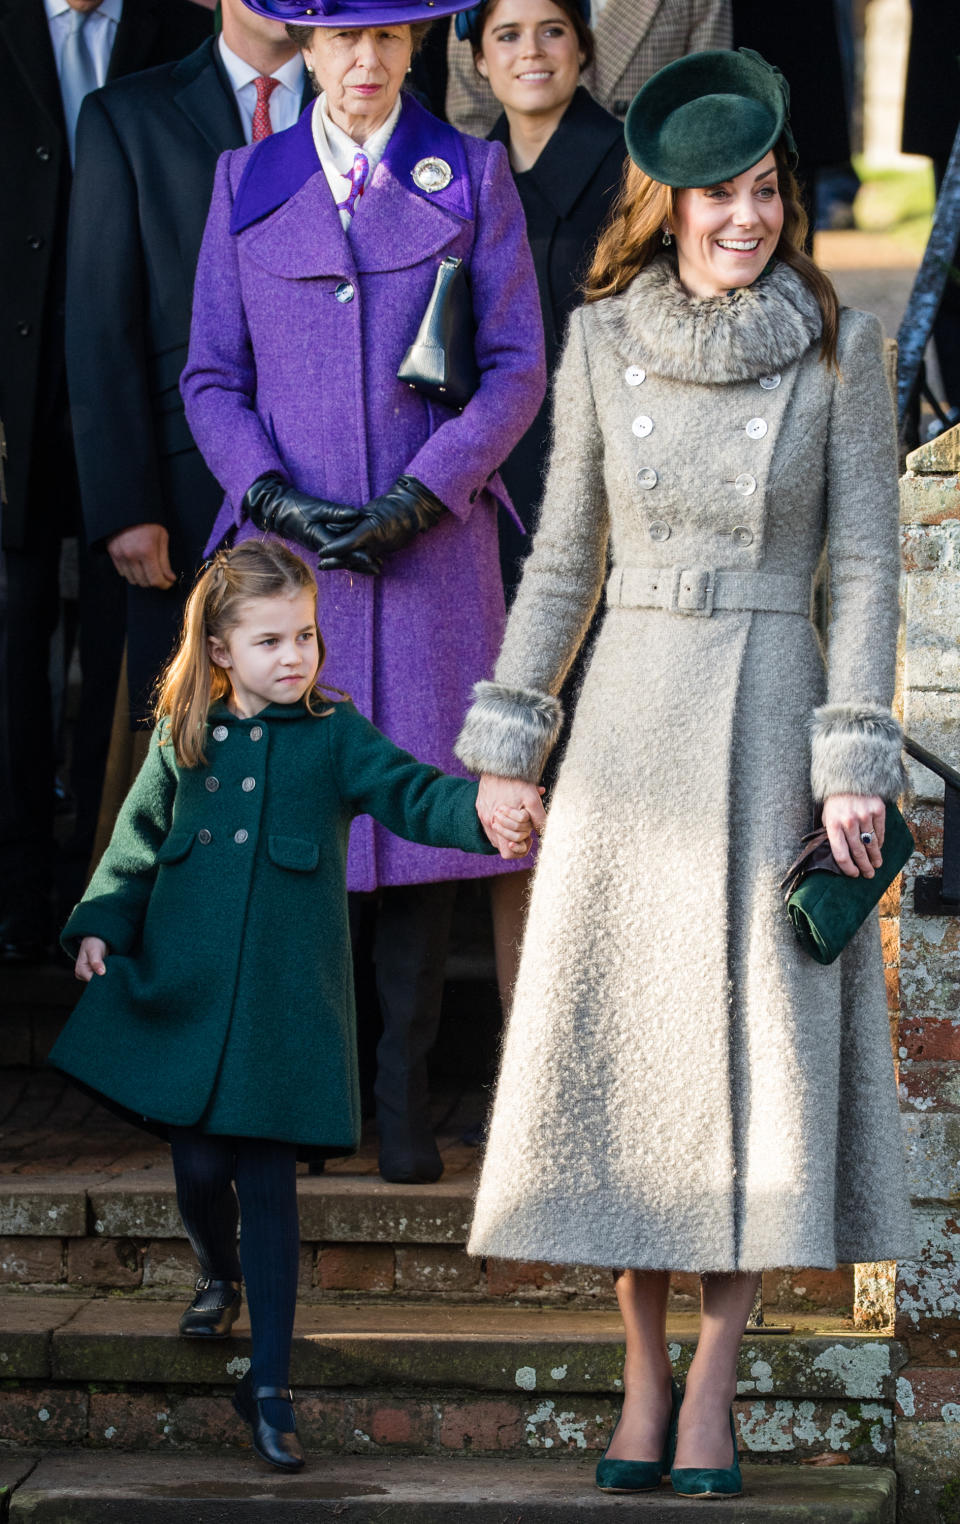 Princess Charlotte and the Duchess of Cambridge coordinated outfits on Christmas Day. [Photo: Getty]